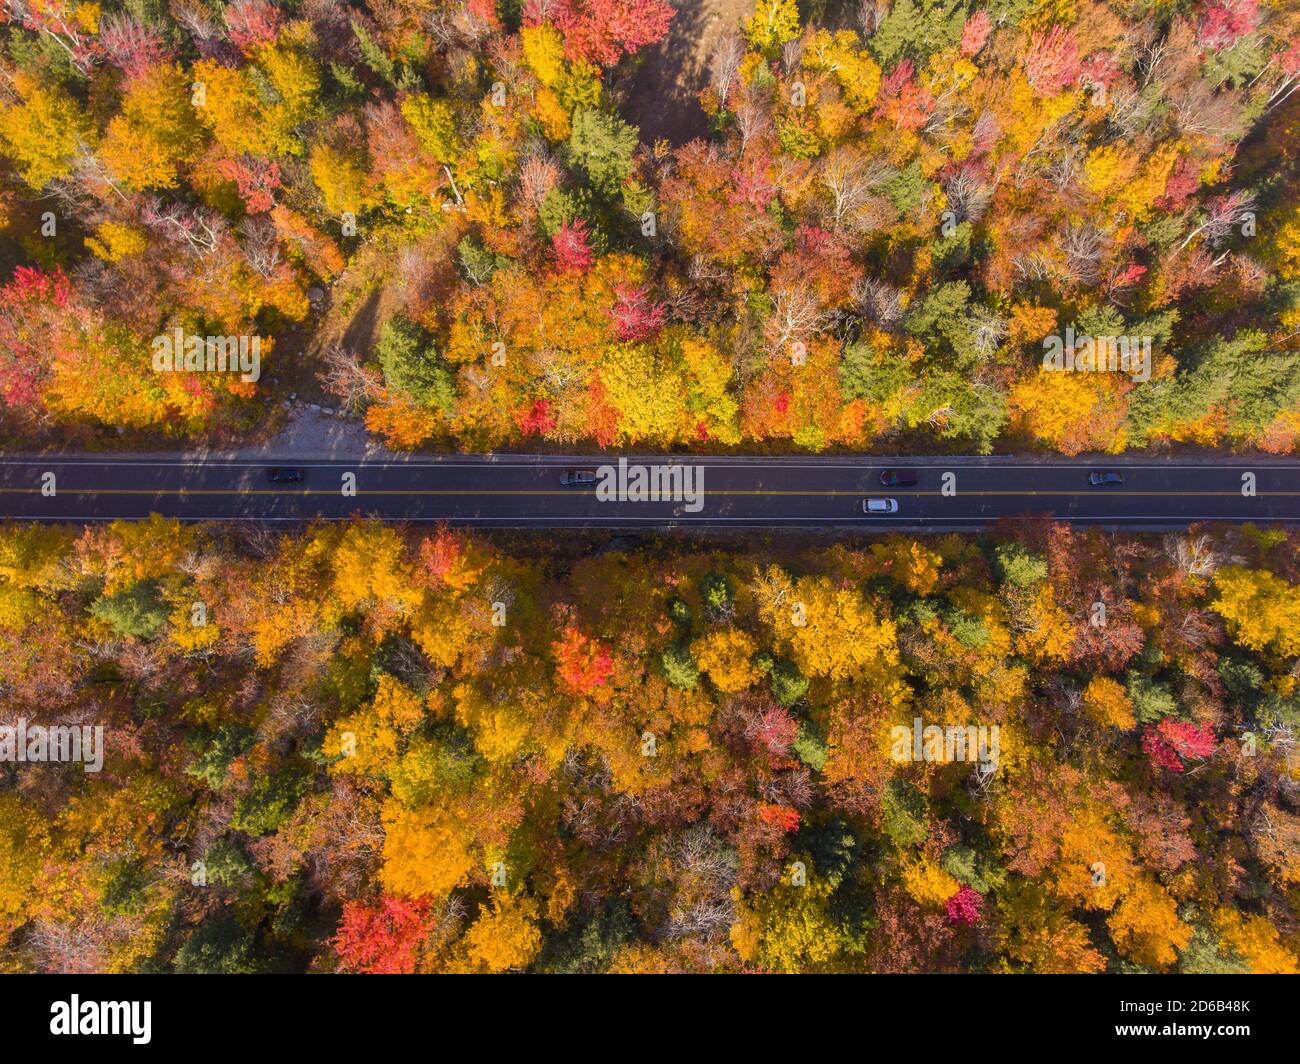 White Mountain National Forest fall foliage on Kancamagus Highway top view near Sugar Hill Scenic Vista, Town of Lincoln, New Hampshire NH, USA. Stock Photo